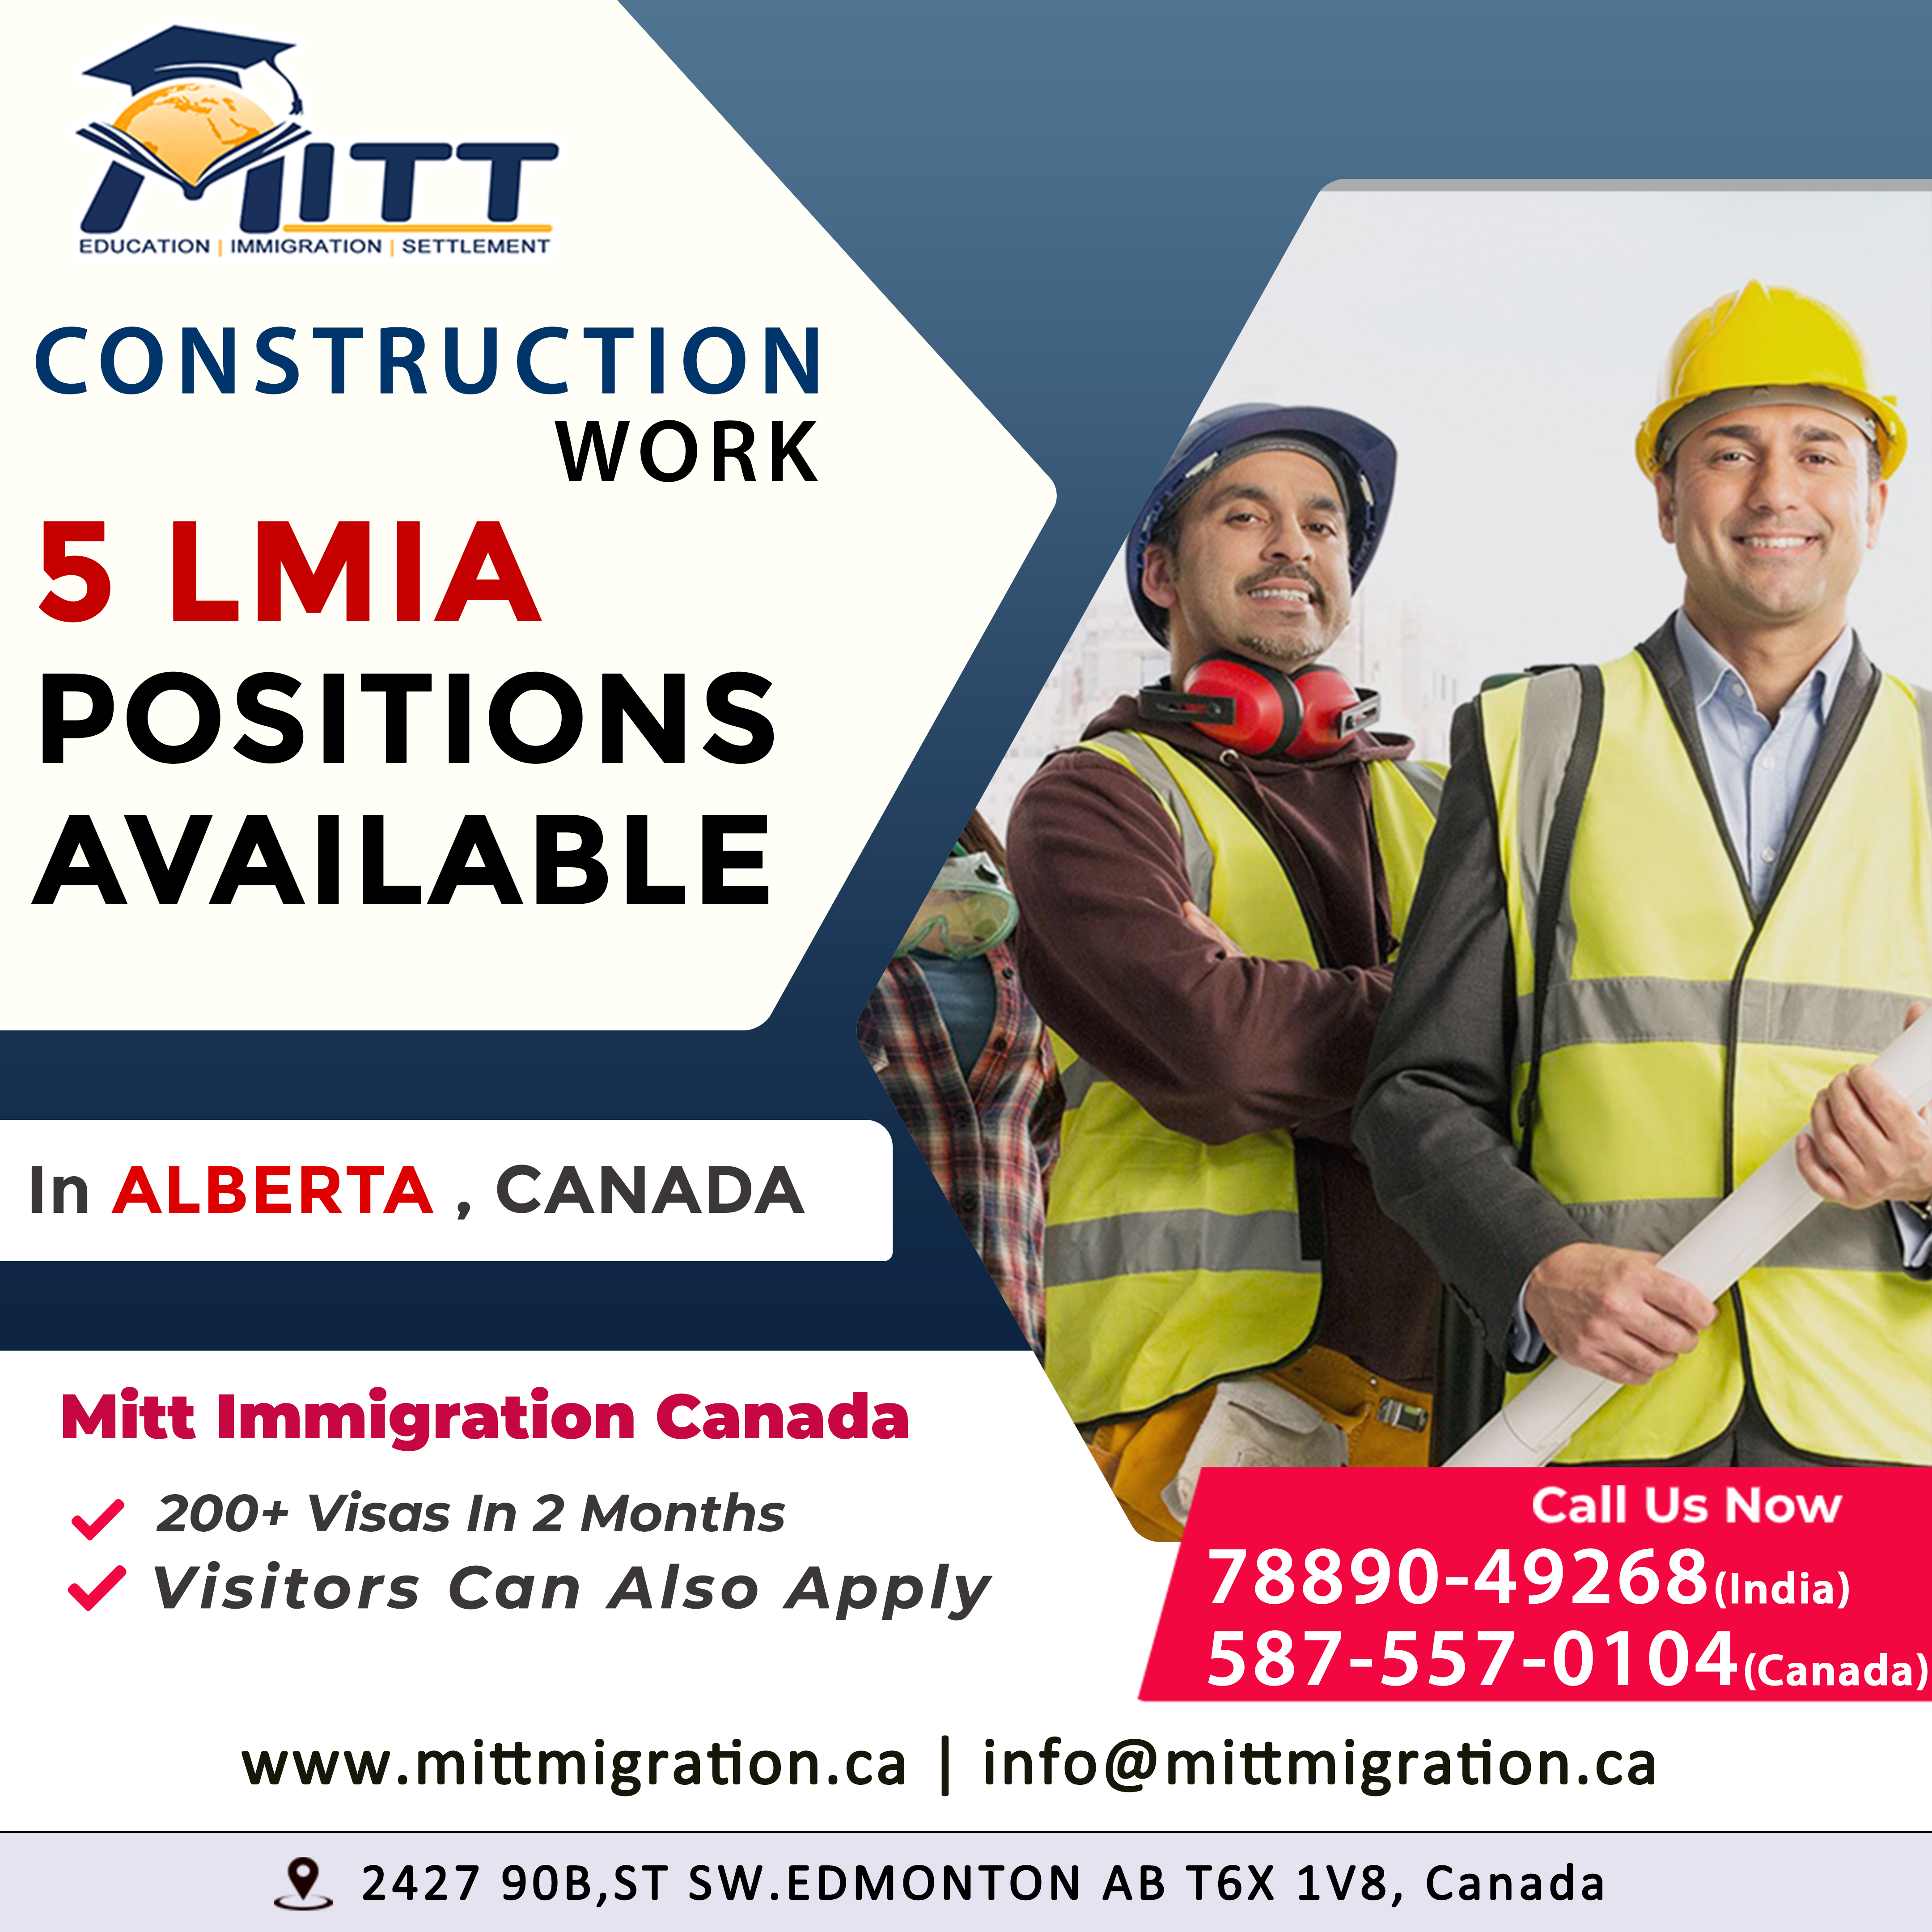 Are you a construction worker looking for job opportunities in Canada?